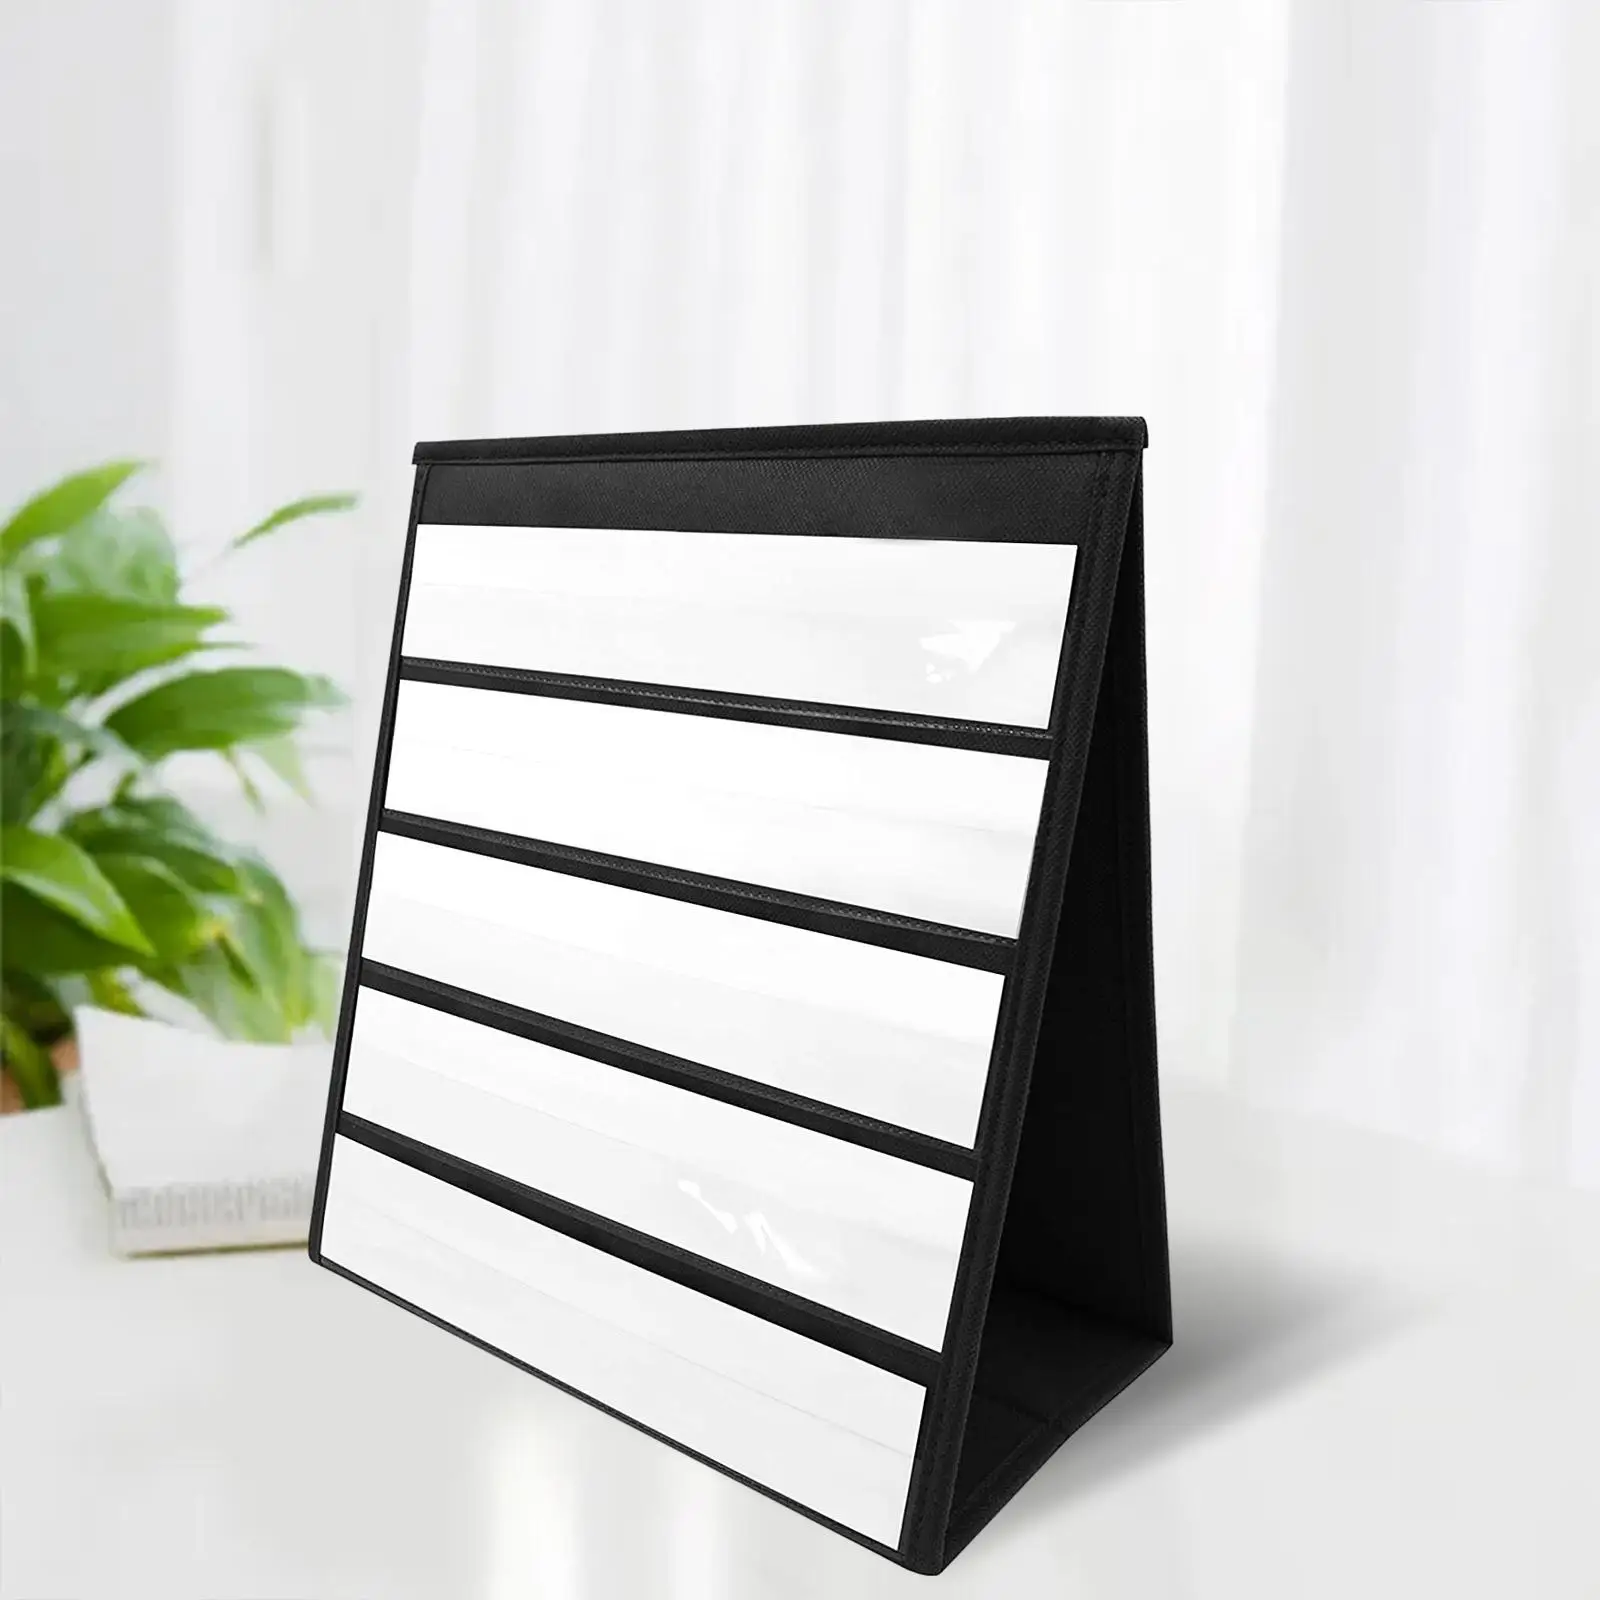 Tabletop Pocket Chart with 20x Whiteboard Cards Educational Self Standing for Desk